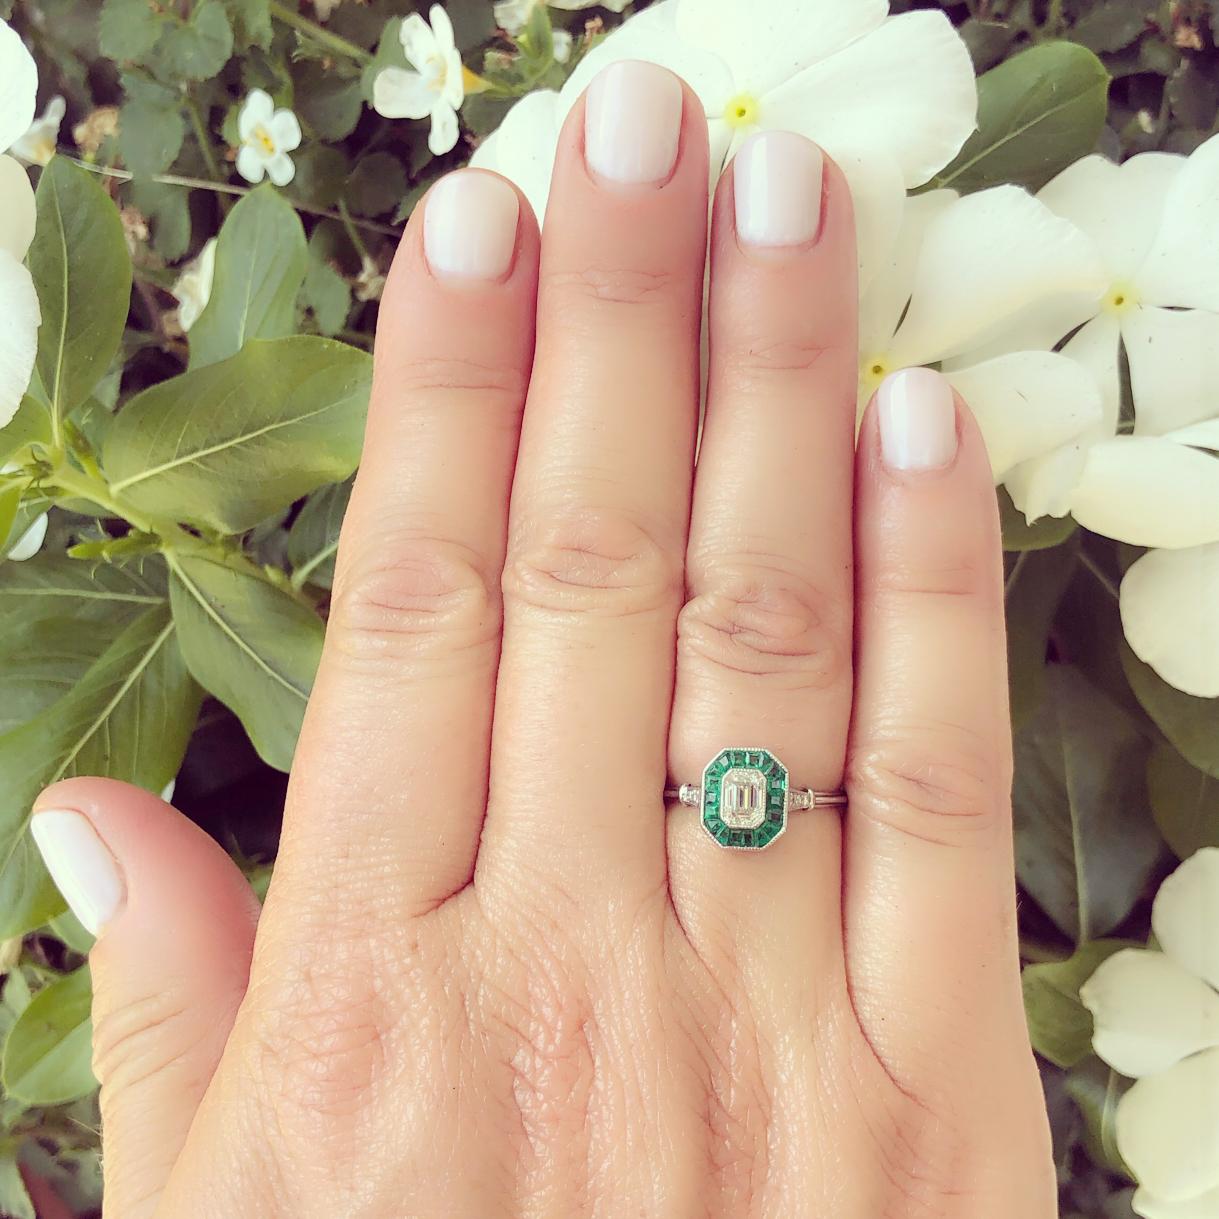 Go back to an era of fine design with this lovely Art Deco inspired 18k white gold ring! It centers a bezel-set emerald-cut diamond, weighing an estimated 0.50 carat, G/VS, set within a frame of calibre-cut emeralds, and then highlighted with 4